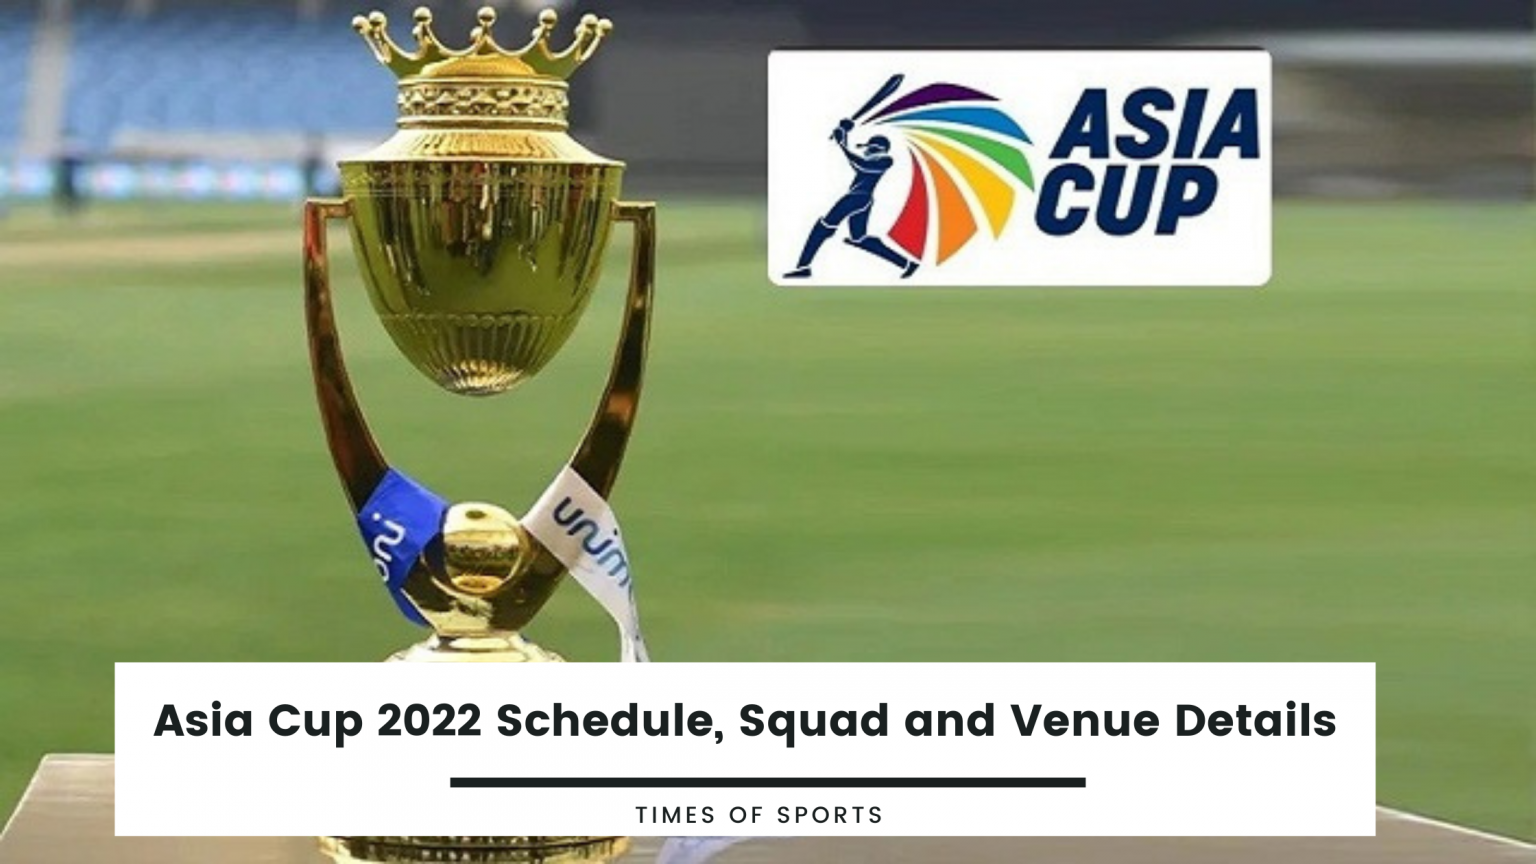 Asia Cup 2022 Schedule, Squad With Teams and Venue Details